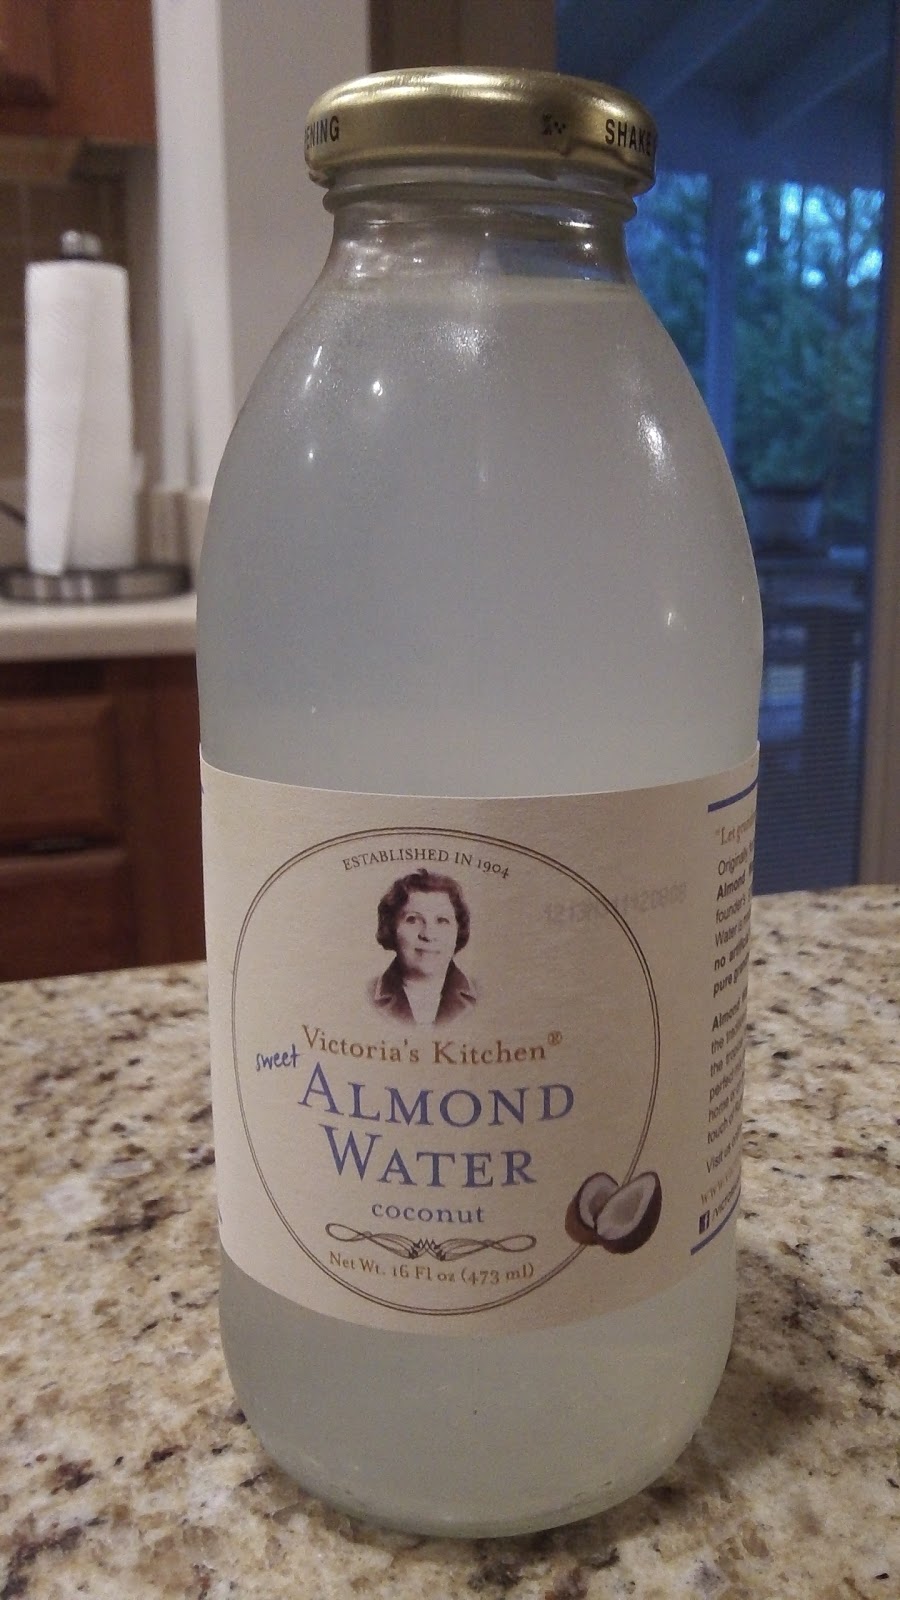 Drinkable Review: Victoria's Kitchen Almond Water Coconut